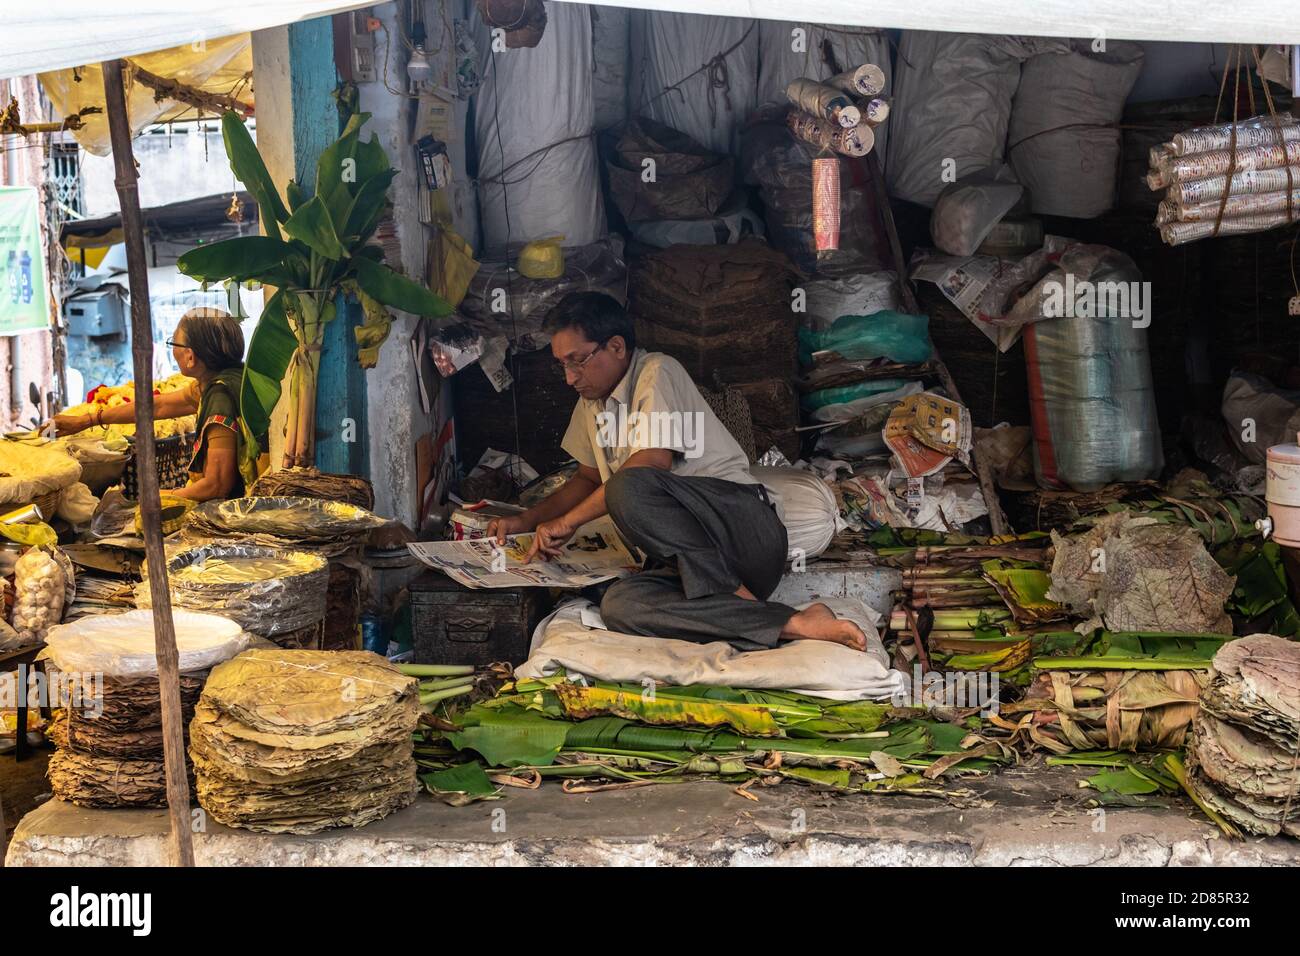 Nagpur, Maharashtra, India - March 2019: An Indian male vendor reading a newspaper inside his shop that sells banana leaves and plates. Stock Photo